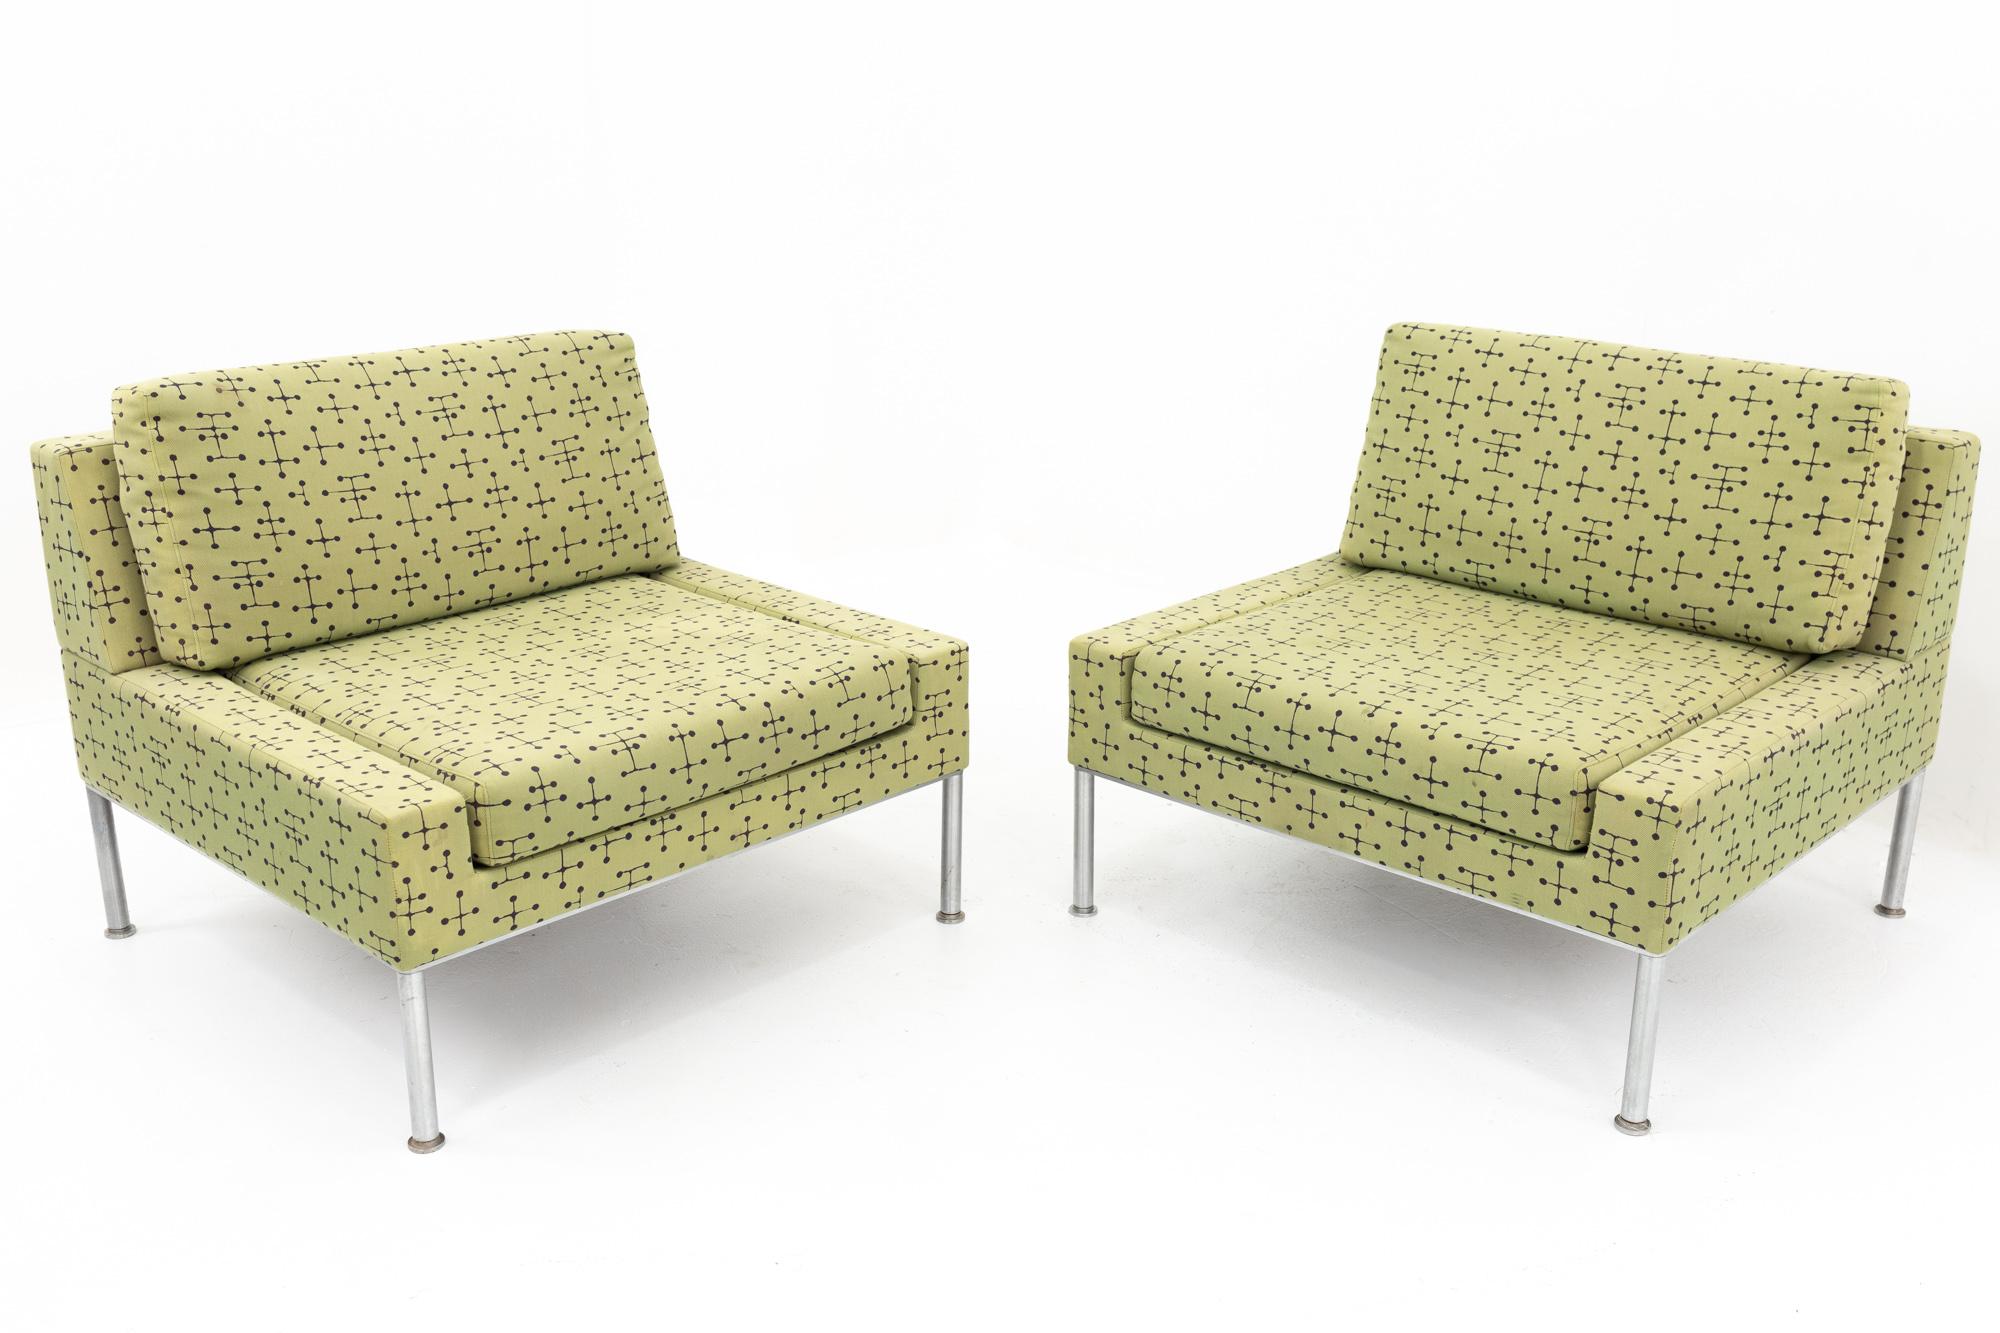 Keilhauer mid century chrome upholstered lounge chairs - matching pair
Each chair measures 34.25 wide x 30 deep x 30 high with a seat height of 16.5 inches

All pieces of furniture can be had in what we call restored vintage condition. That means